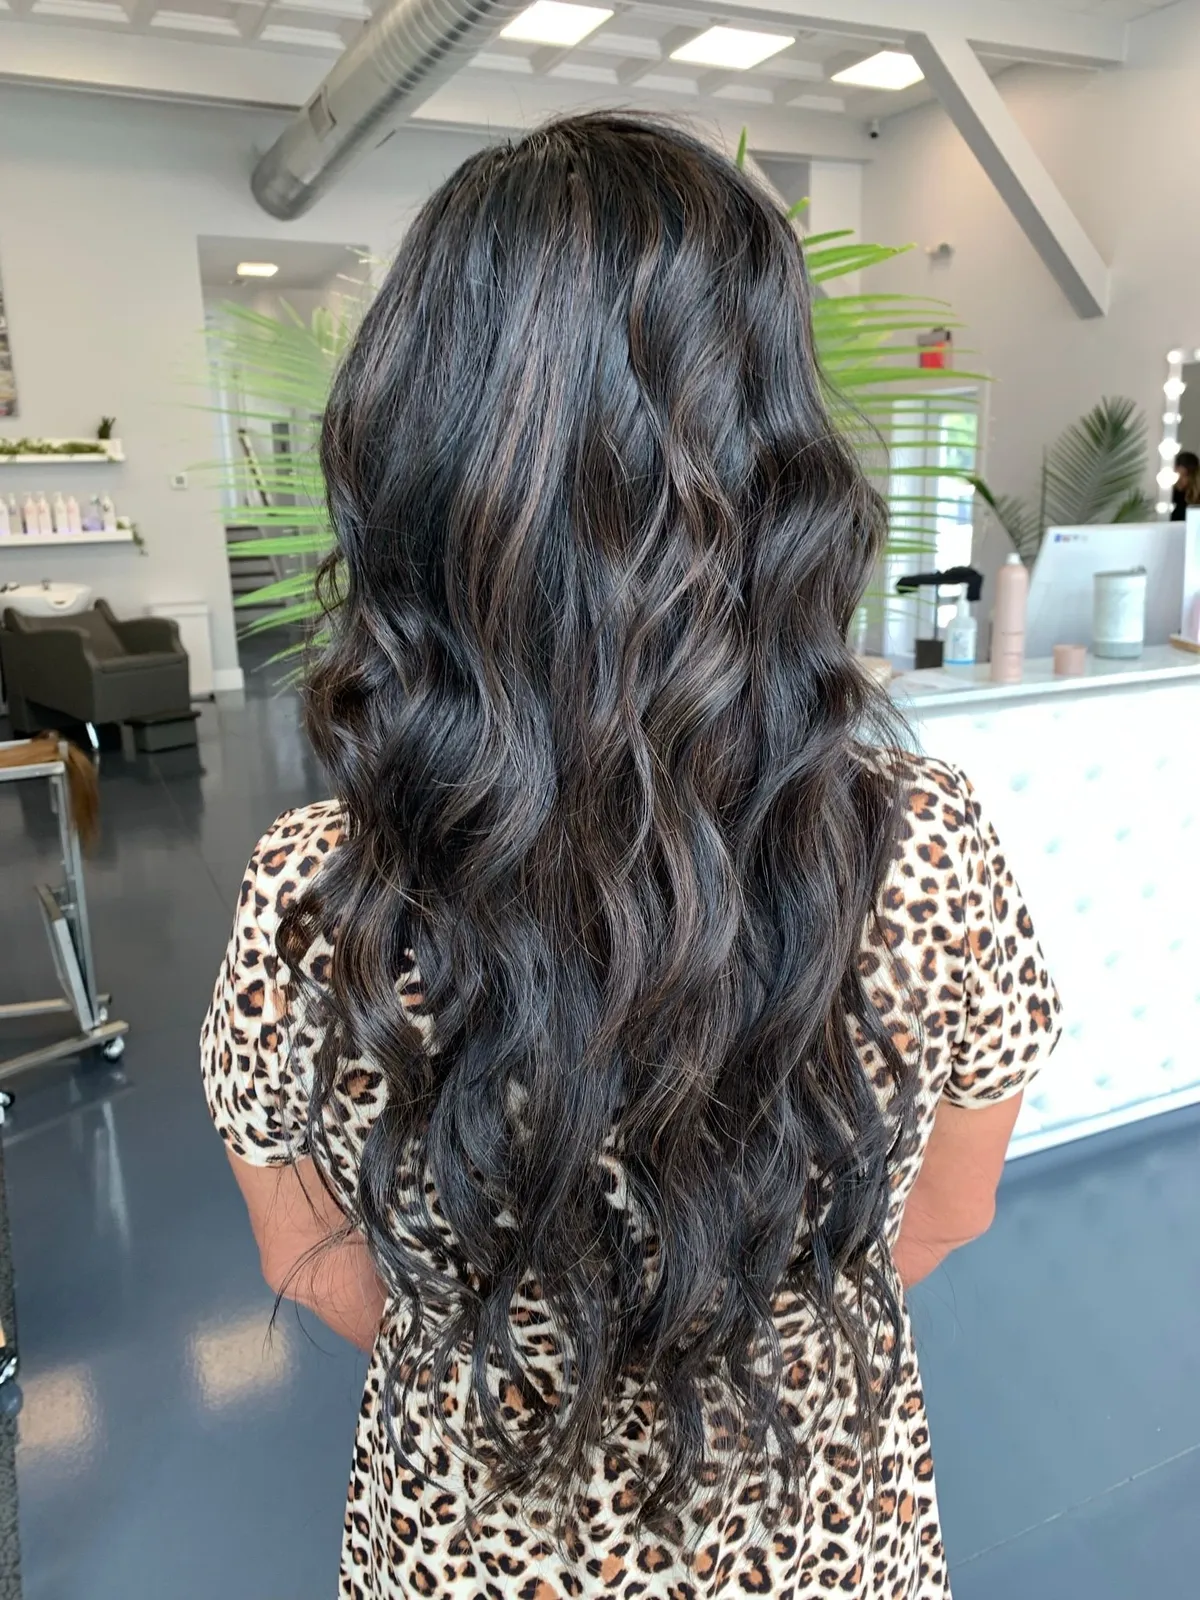 Crown Hair Extensions in Louisville KY - Emma Justine Salon